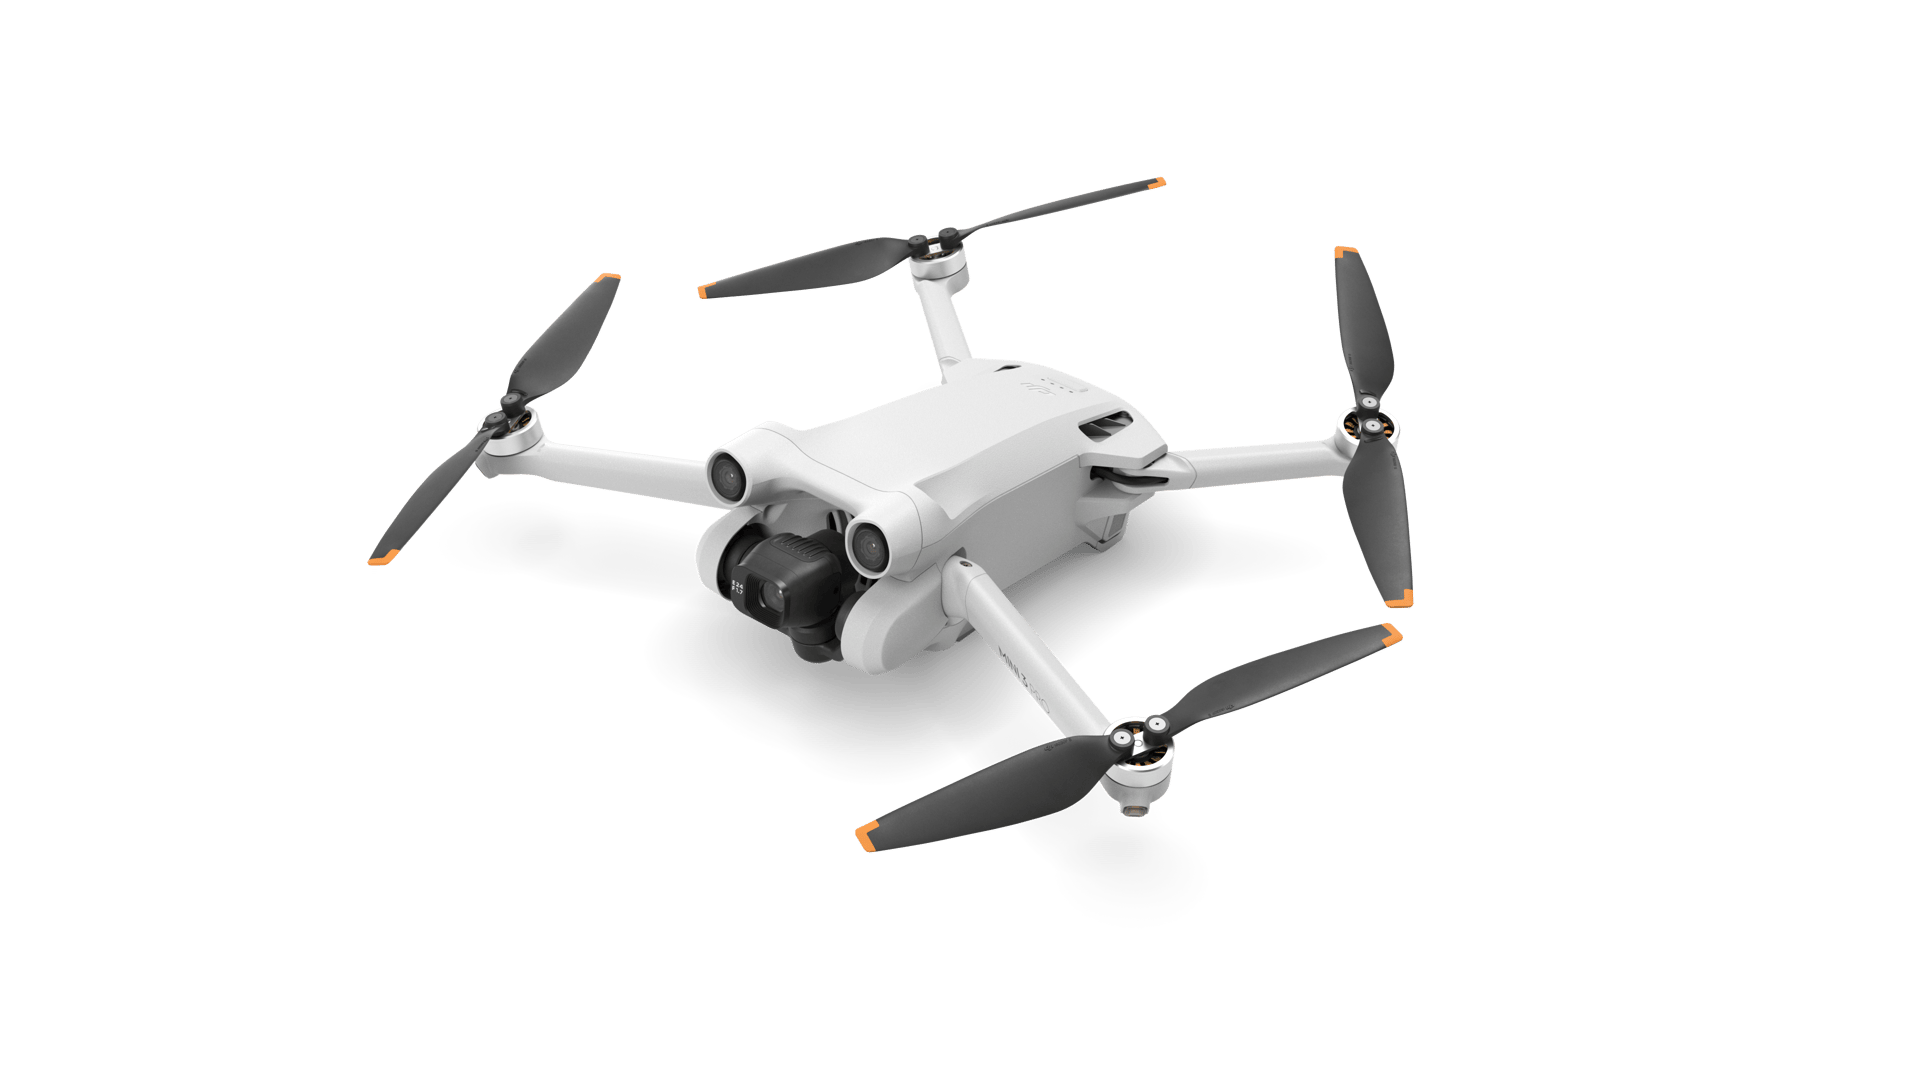 DJI MINI 3 Pro VS DJI AIR 2S—Which is the best consumer drone for 2022?